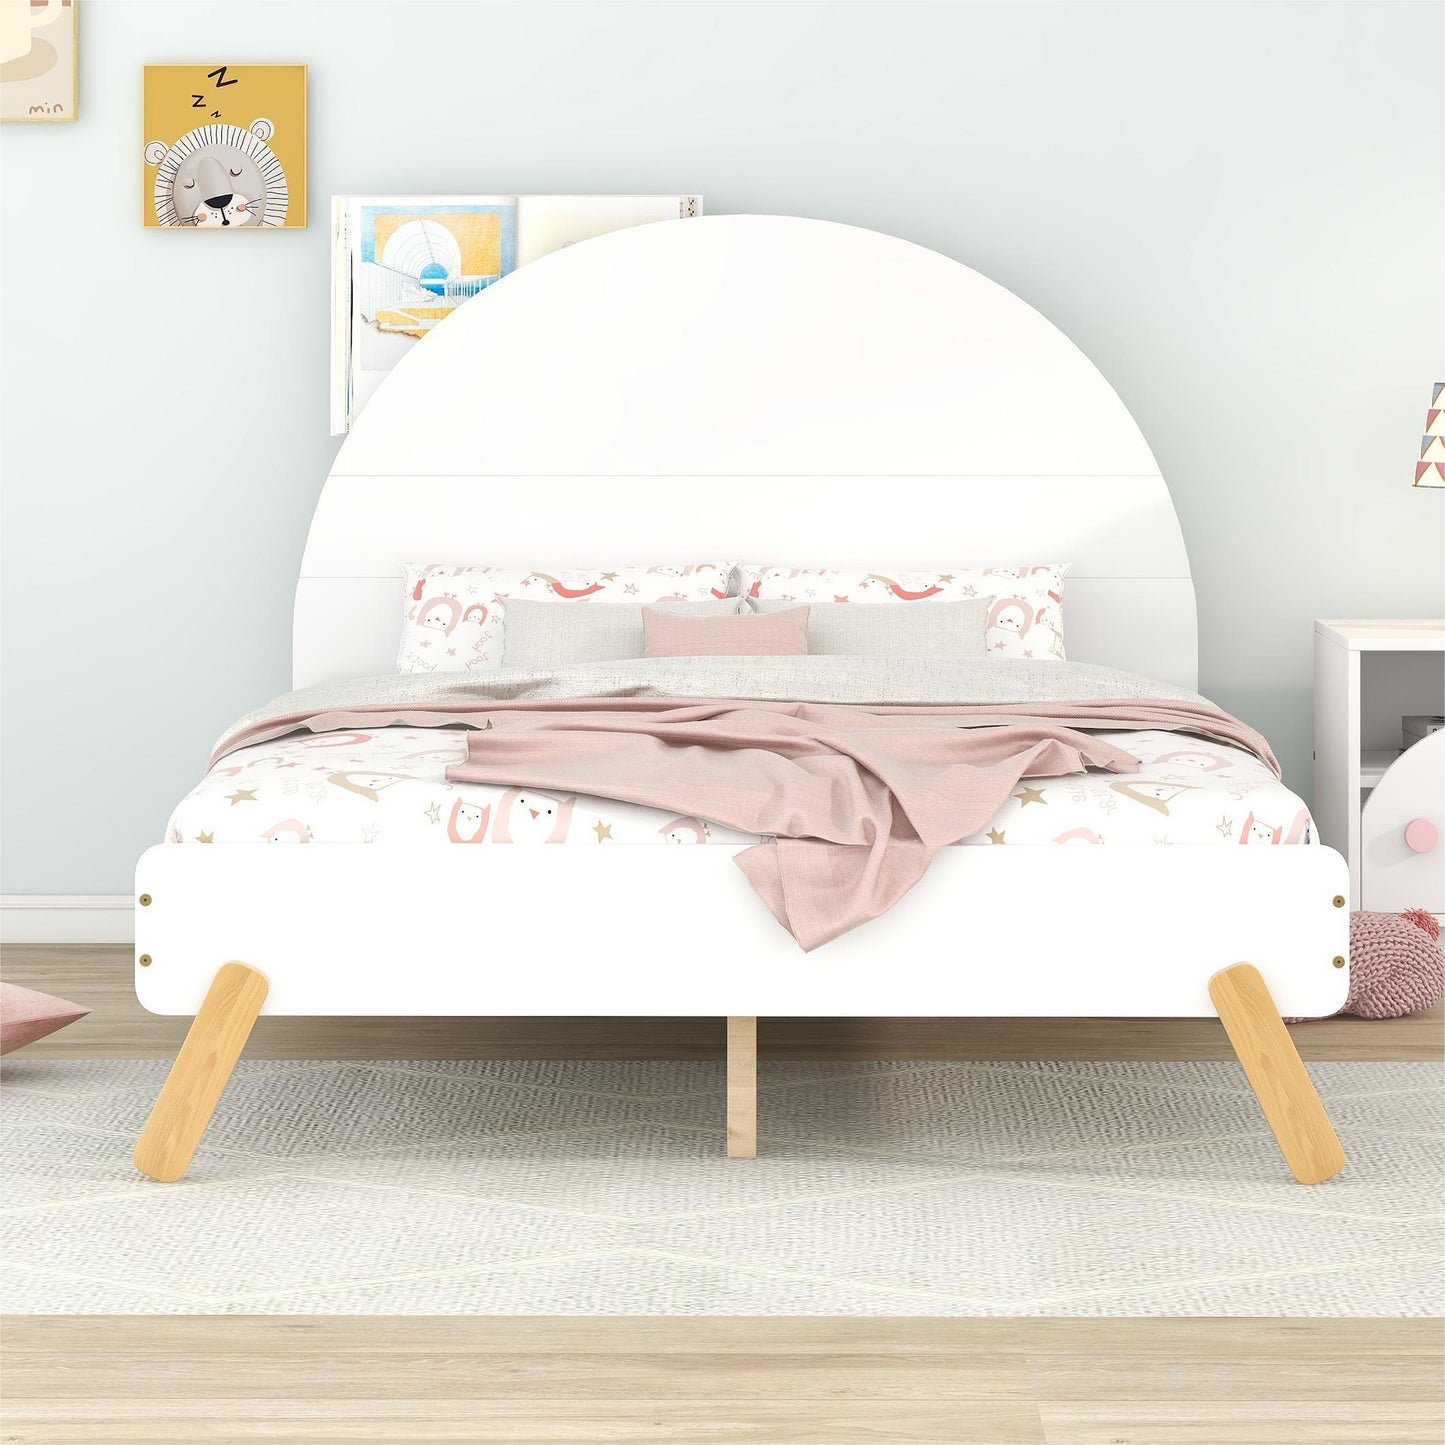 Wooden Cute Platform Bed With Curved Headboard ,Full Size Bed With Shelf Behind Headboard,White